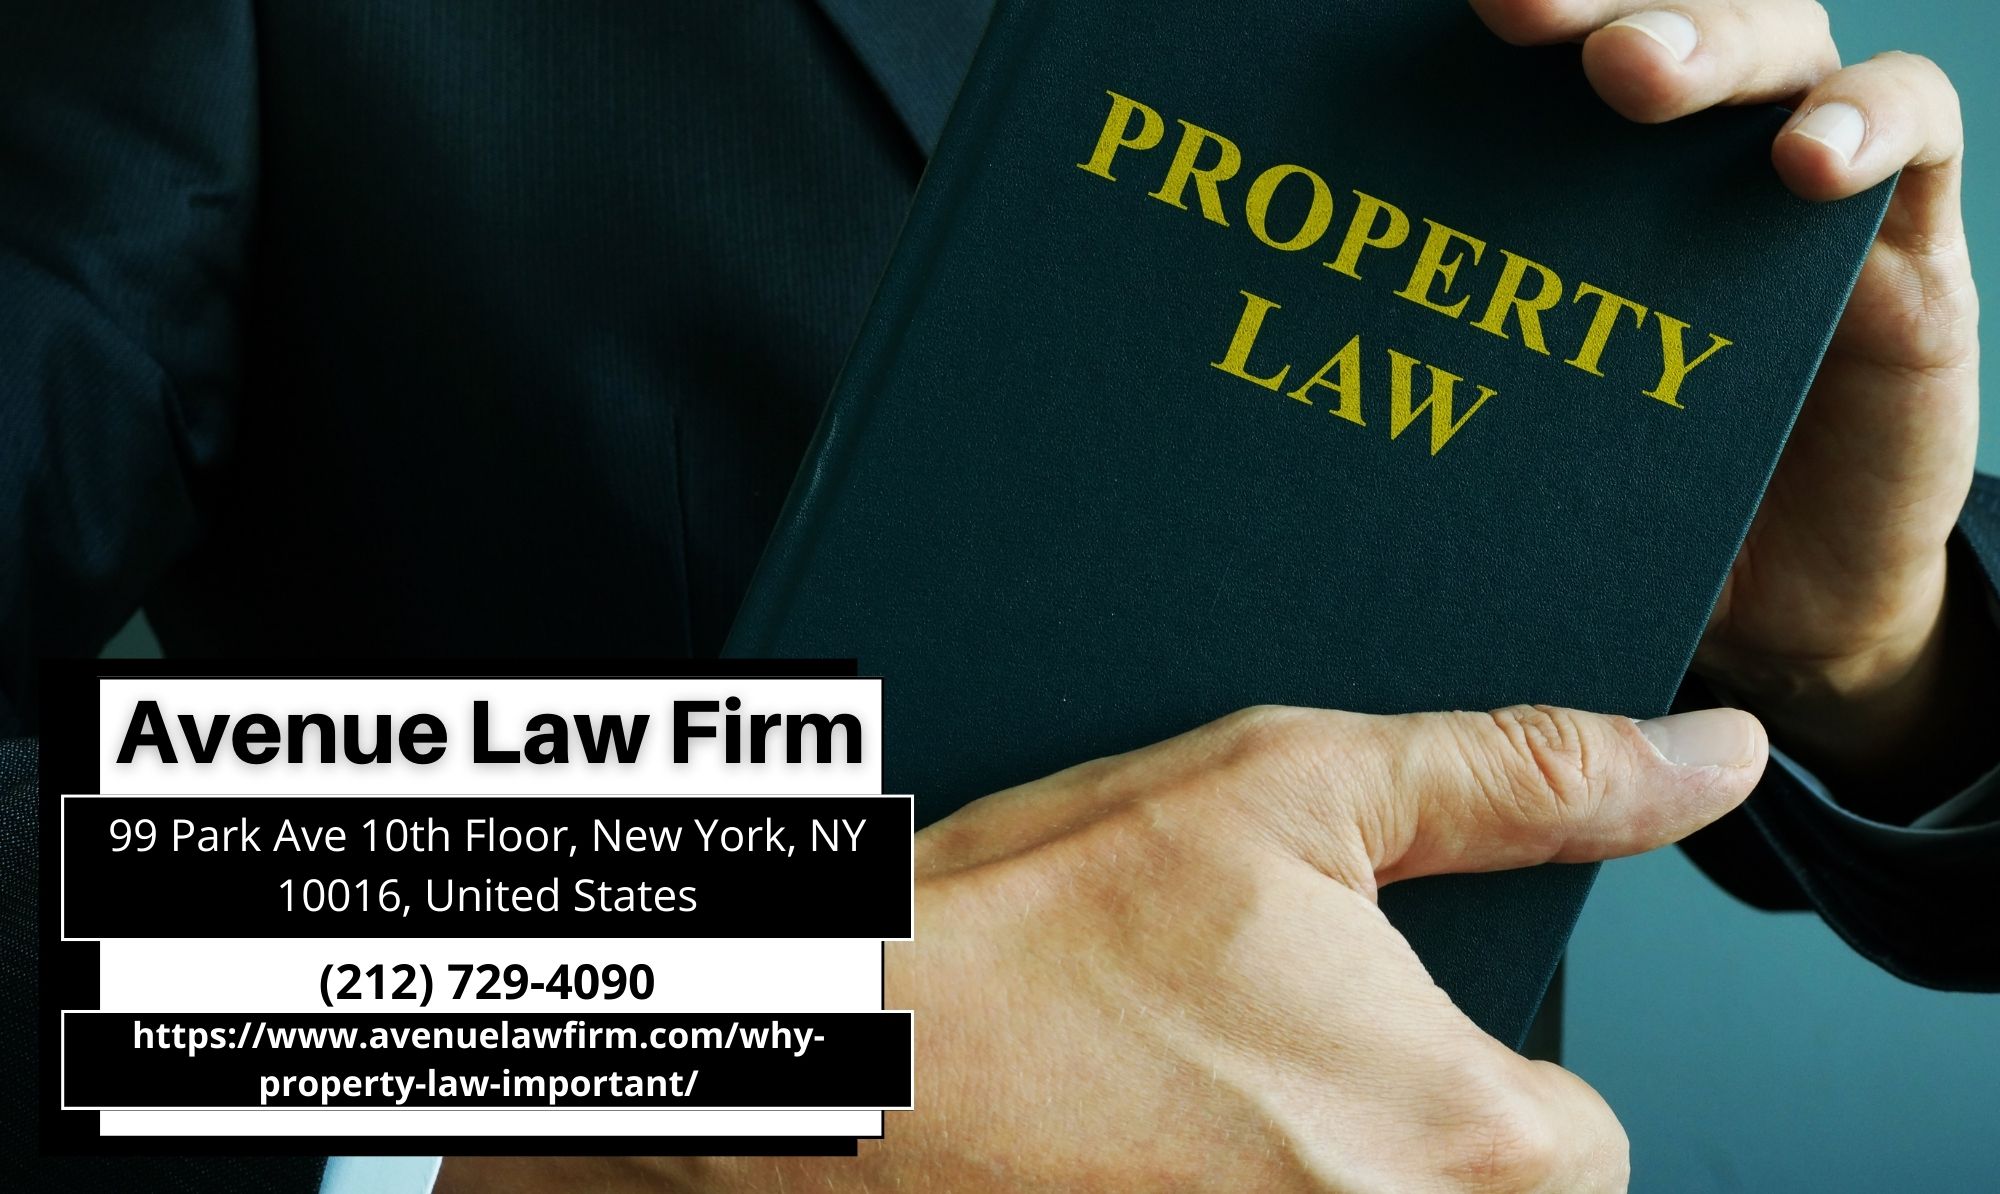 New York Real Estate Attorney Peter Zinkovetsky Sheds Light on the Importance of Property Law in a Revealing Article